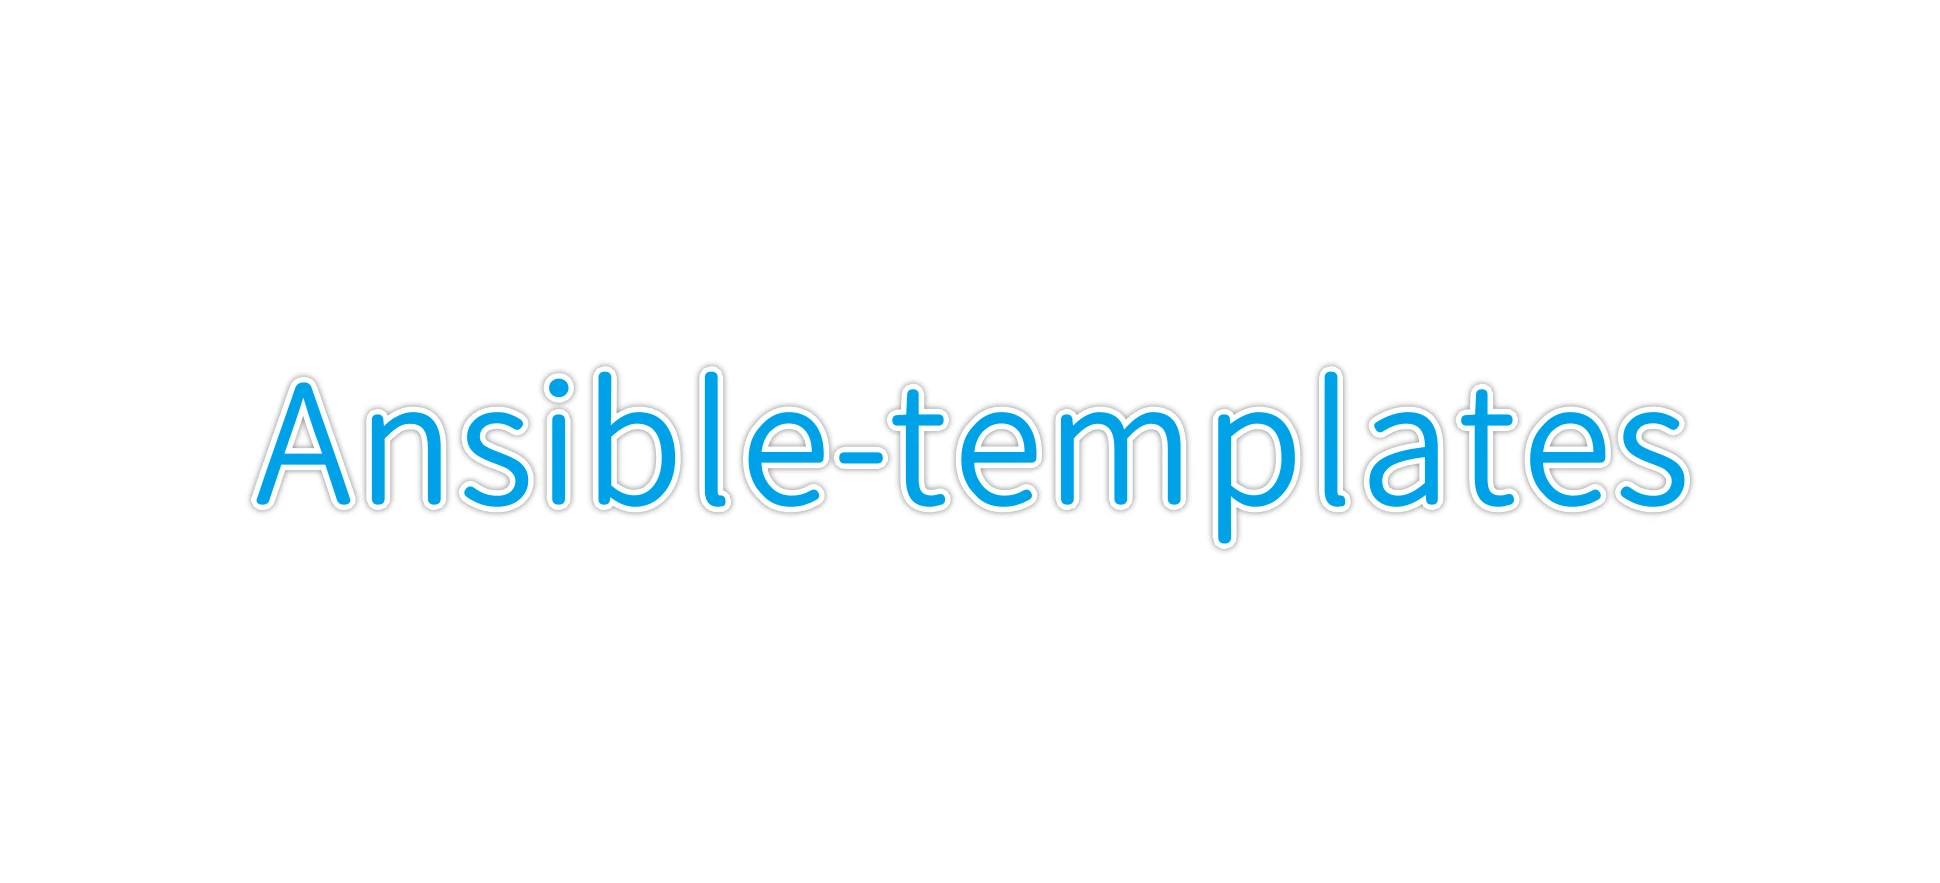 Ansible-templates